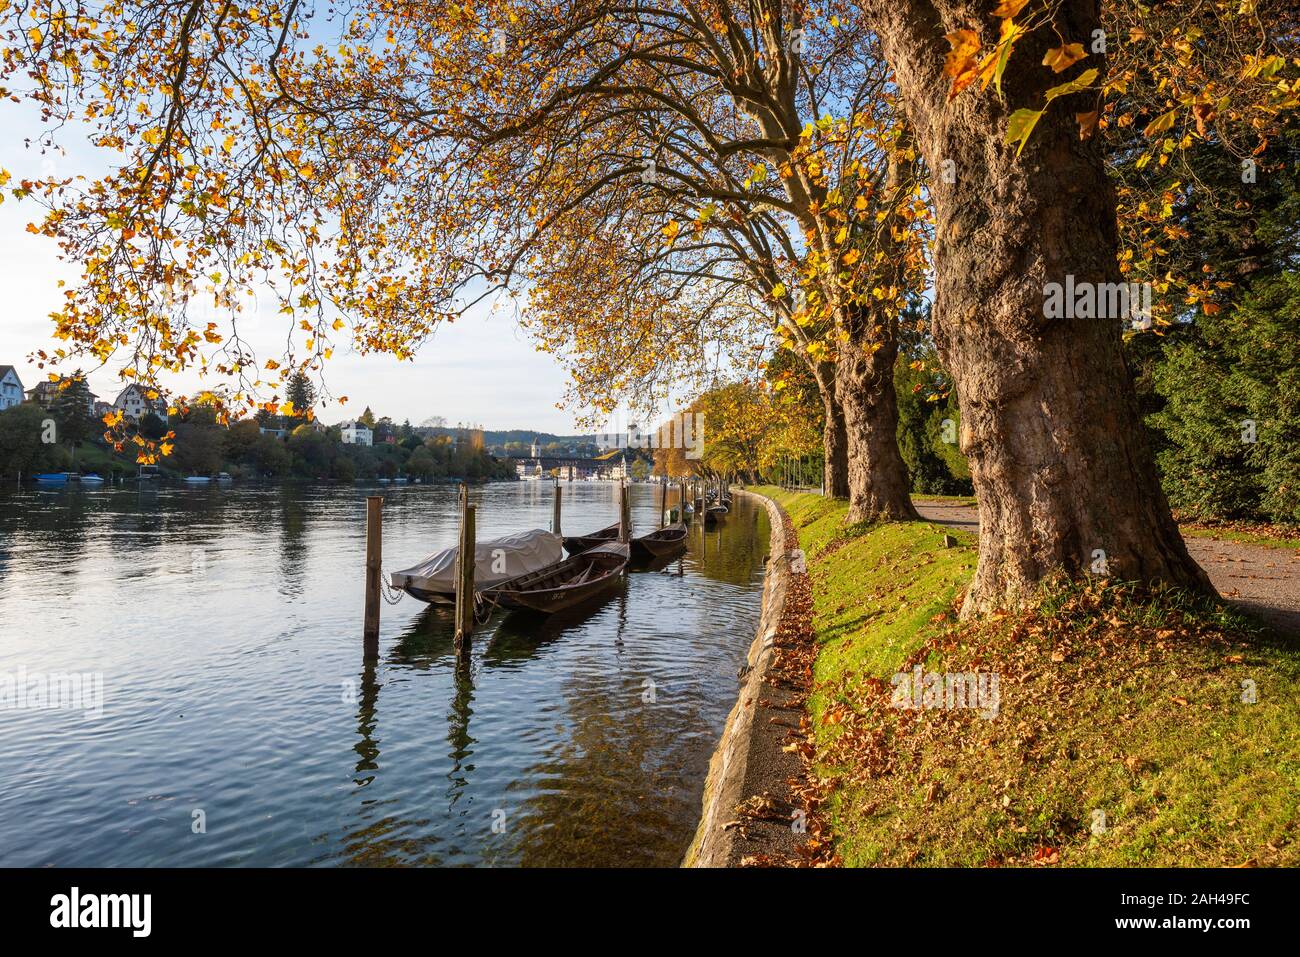 Switzerland, canton Schaffhausen, View of Rhine river and trees Stock Photo